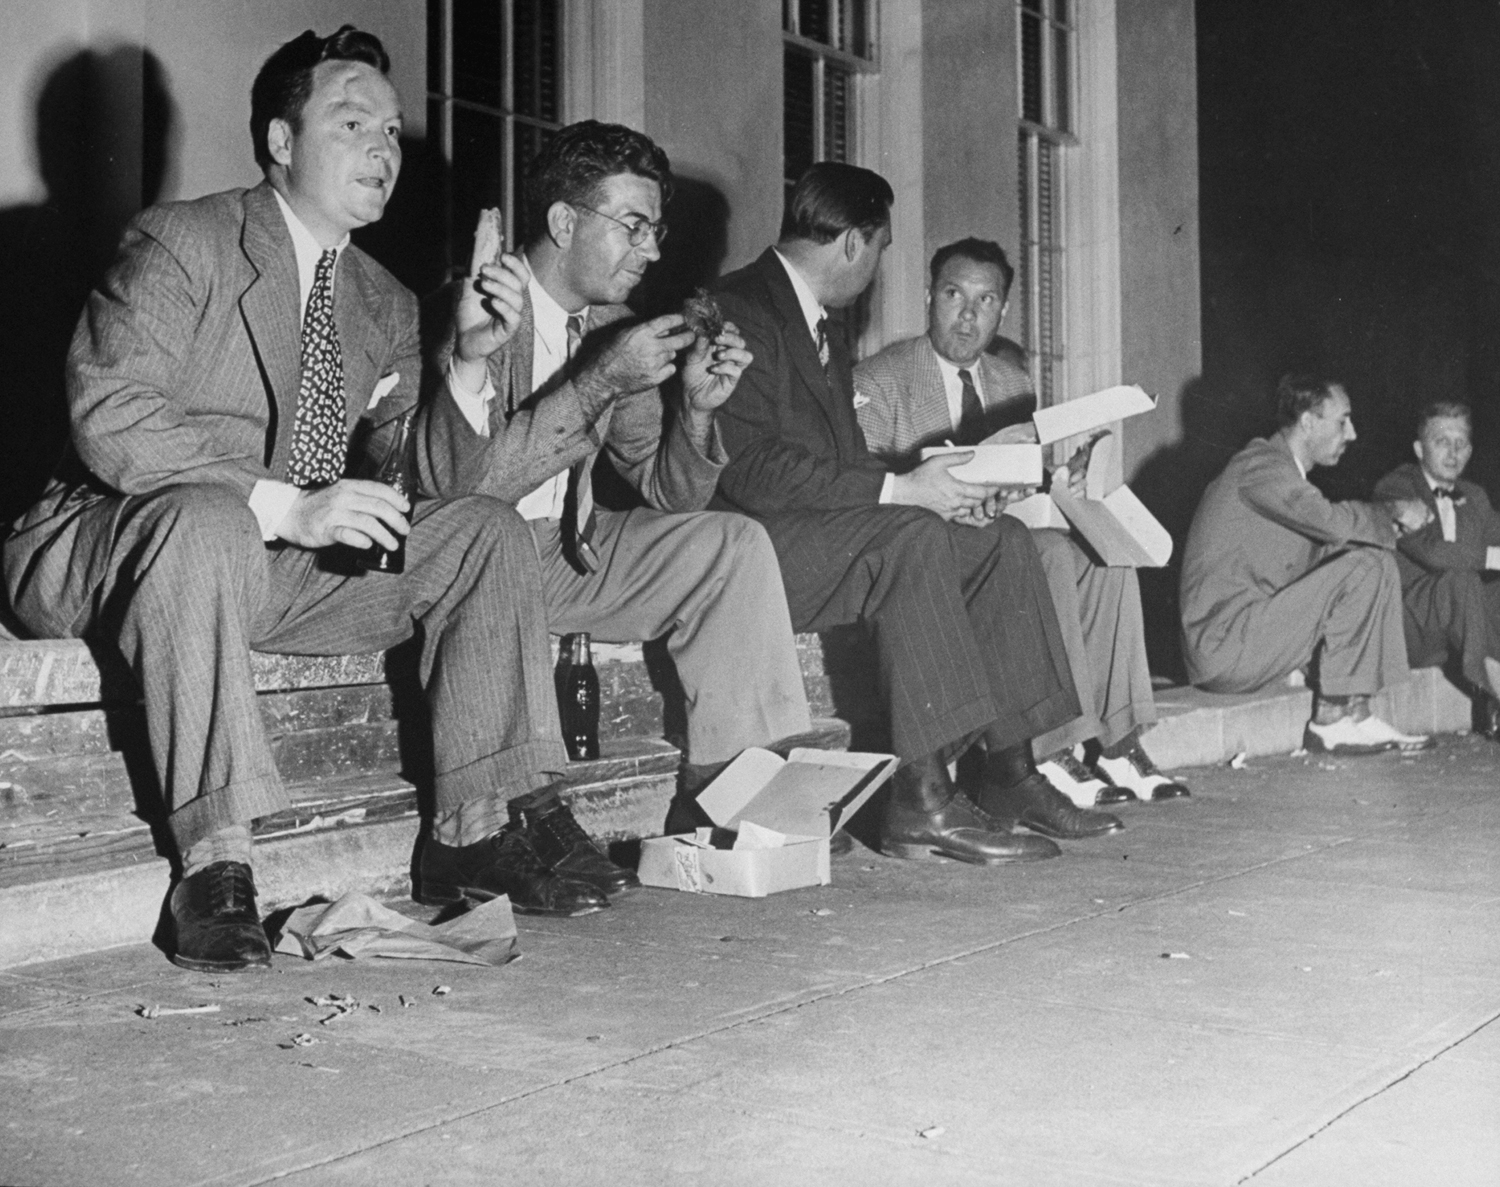 Newsmen eat while wait for news on Japan's acceptance of surrender terms, Washington, 1945.